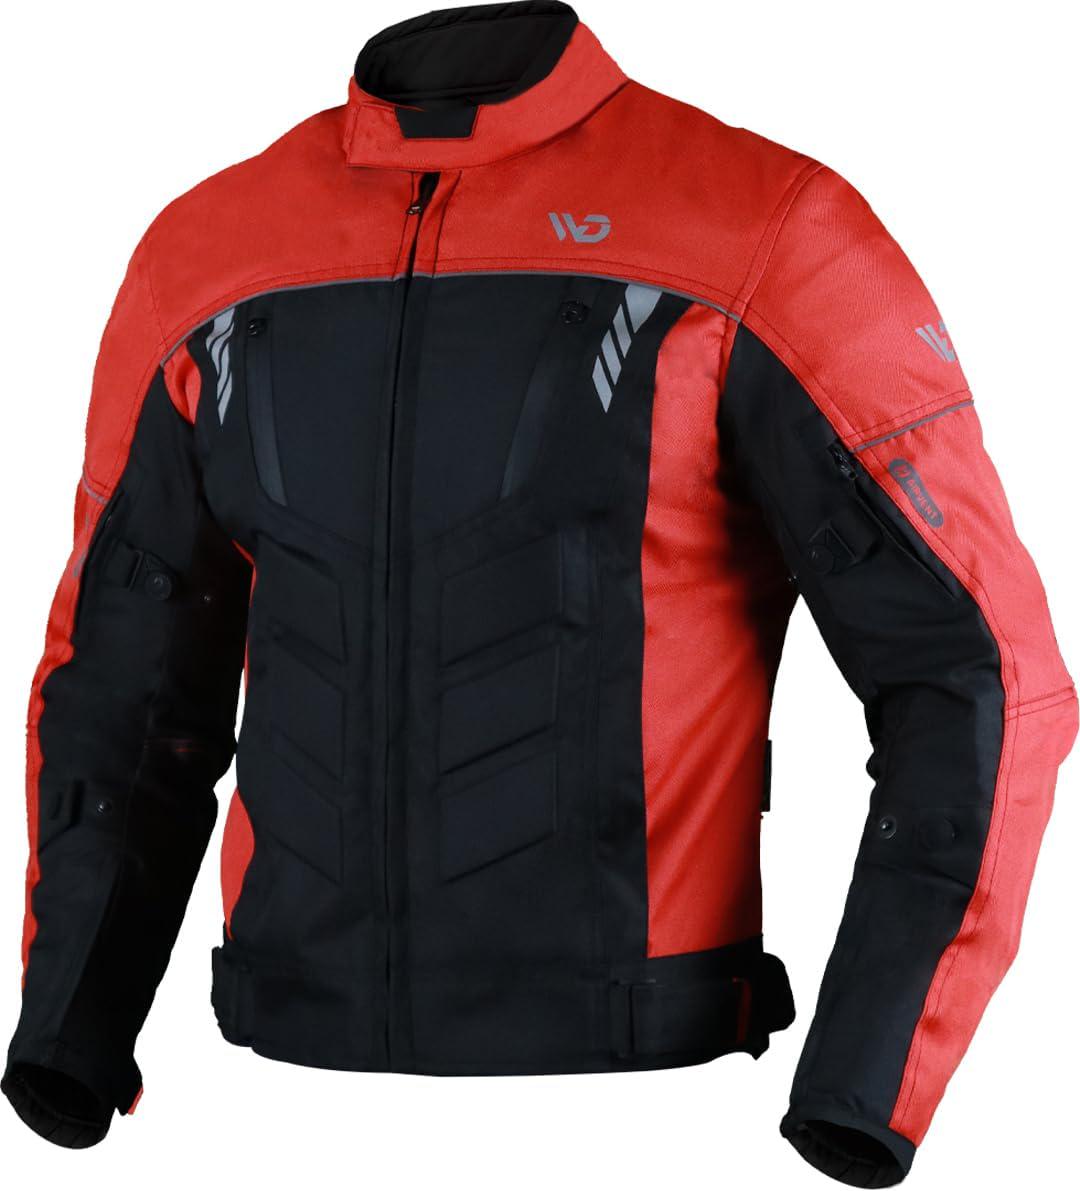 WD Motorsports Vegas 1.0 Men s Textile Motorcycle Jacket, All-Season CE Armored, Waterproof Cordura Biker Jackets with Removeable Lining and Ventilated Zippers (Red, Small)